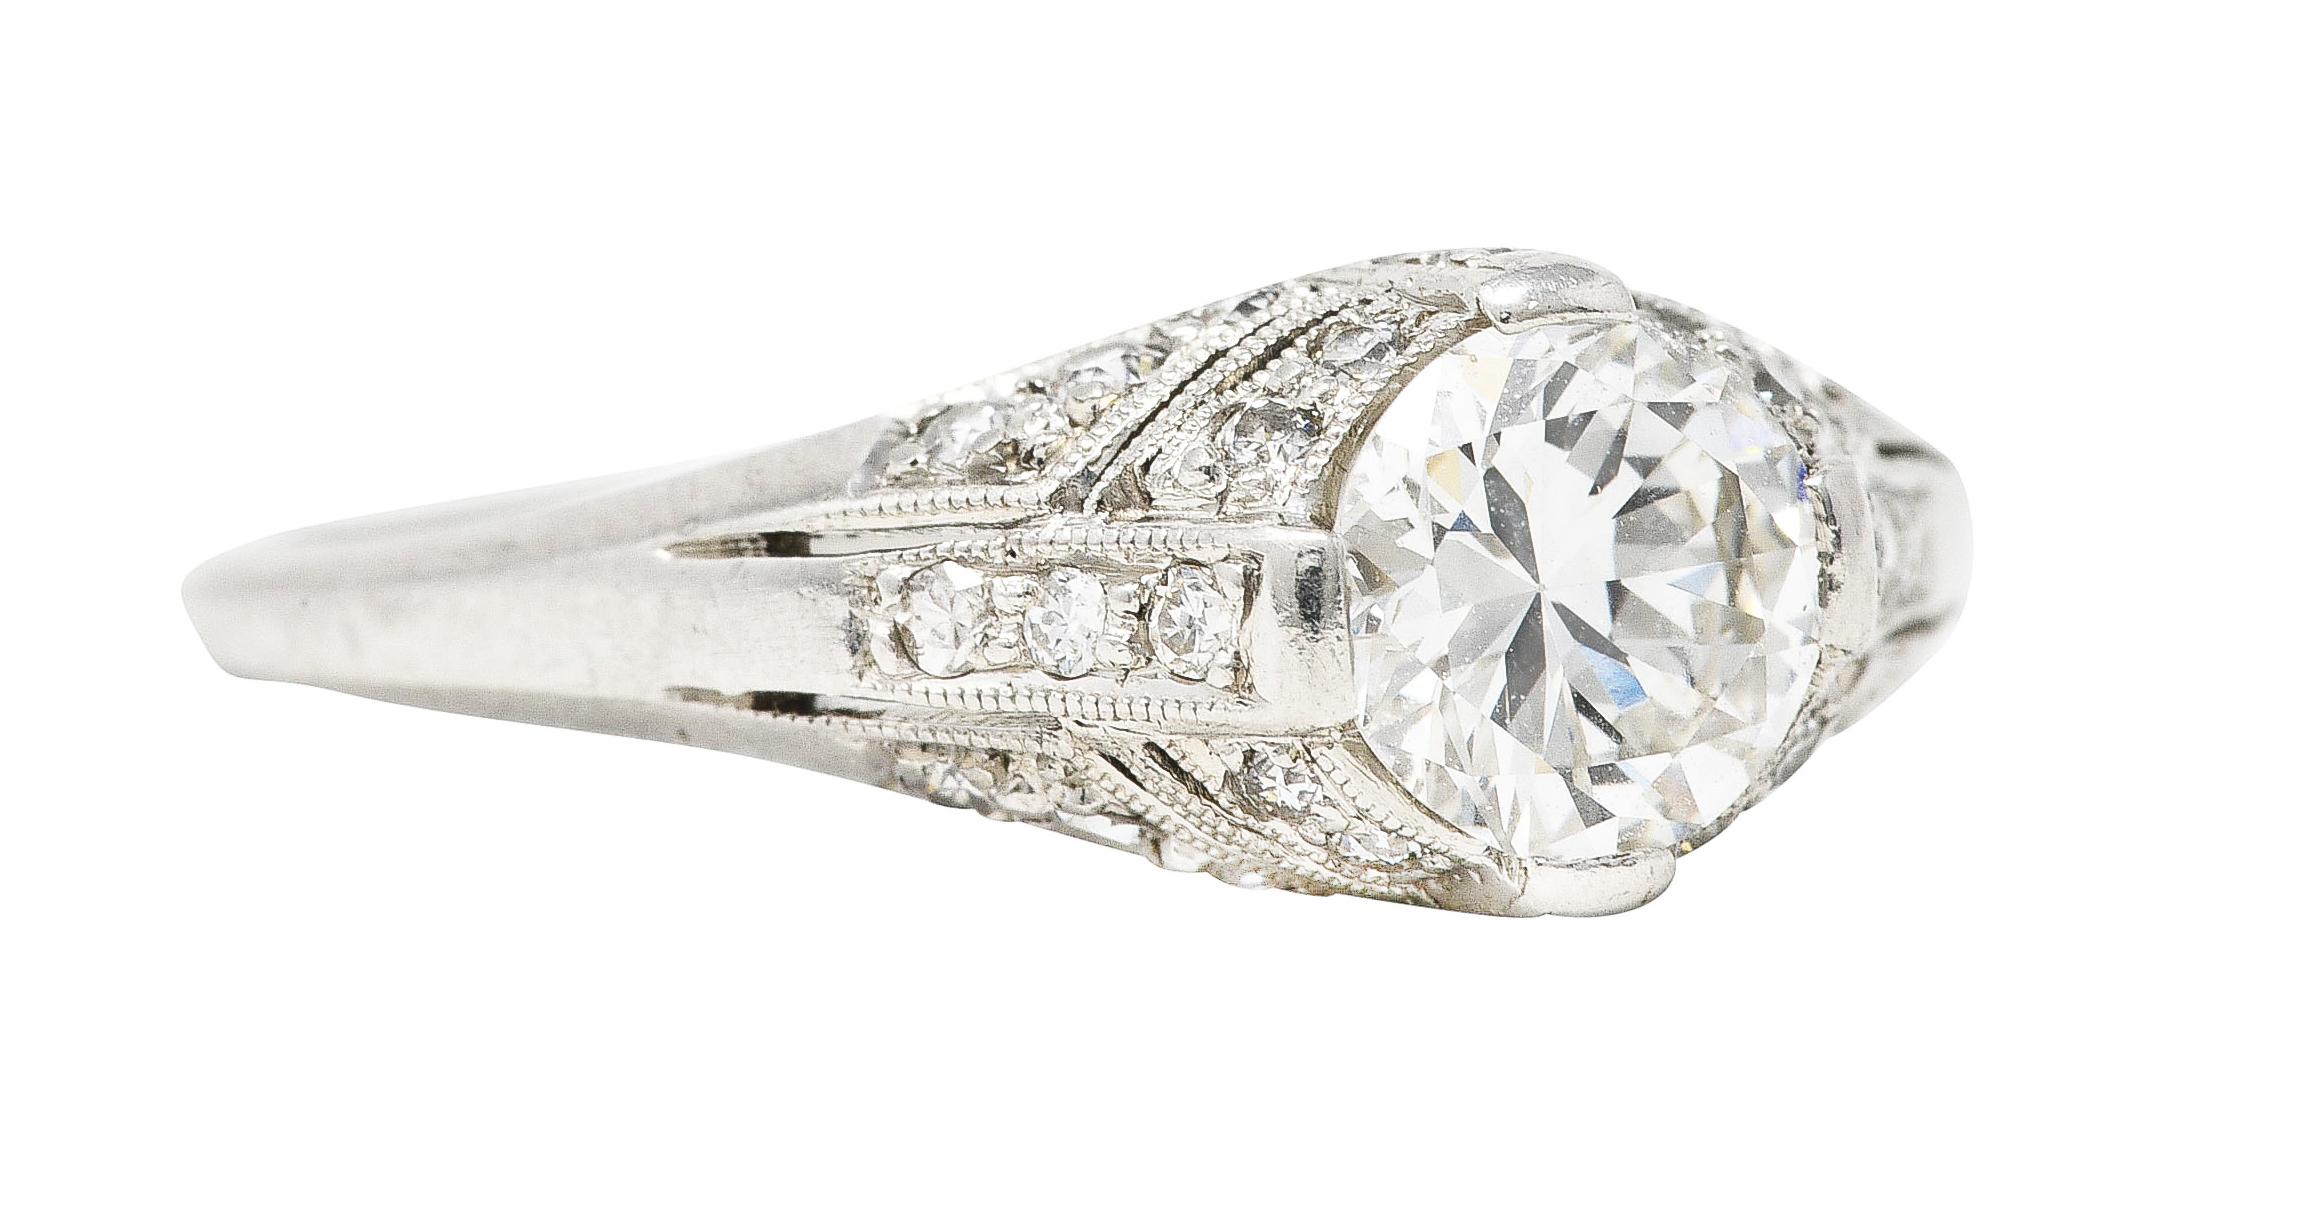 Featuring a transitional cut diamond weighing approximately 0.64 carat - G color with VS2 clarity. Set low in a bombé style mounting via wide prongs with milgrain edges. Bead set throughout by single and old European cut diamond accents. Weighing